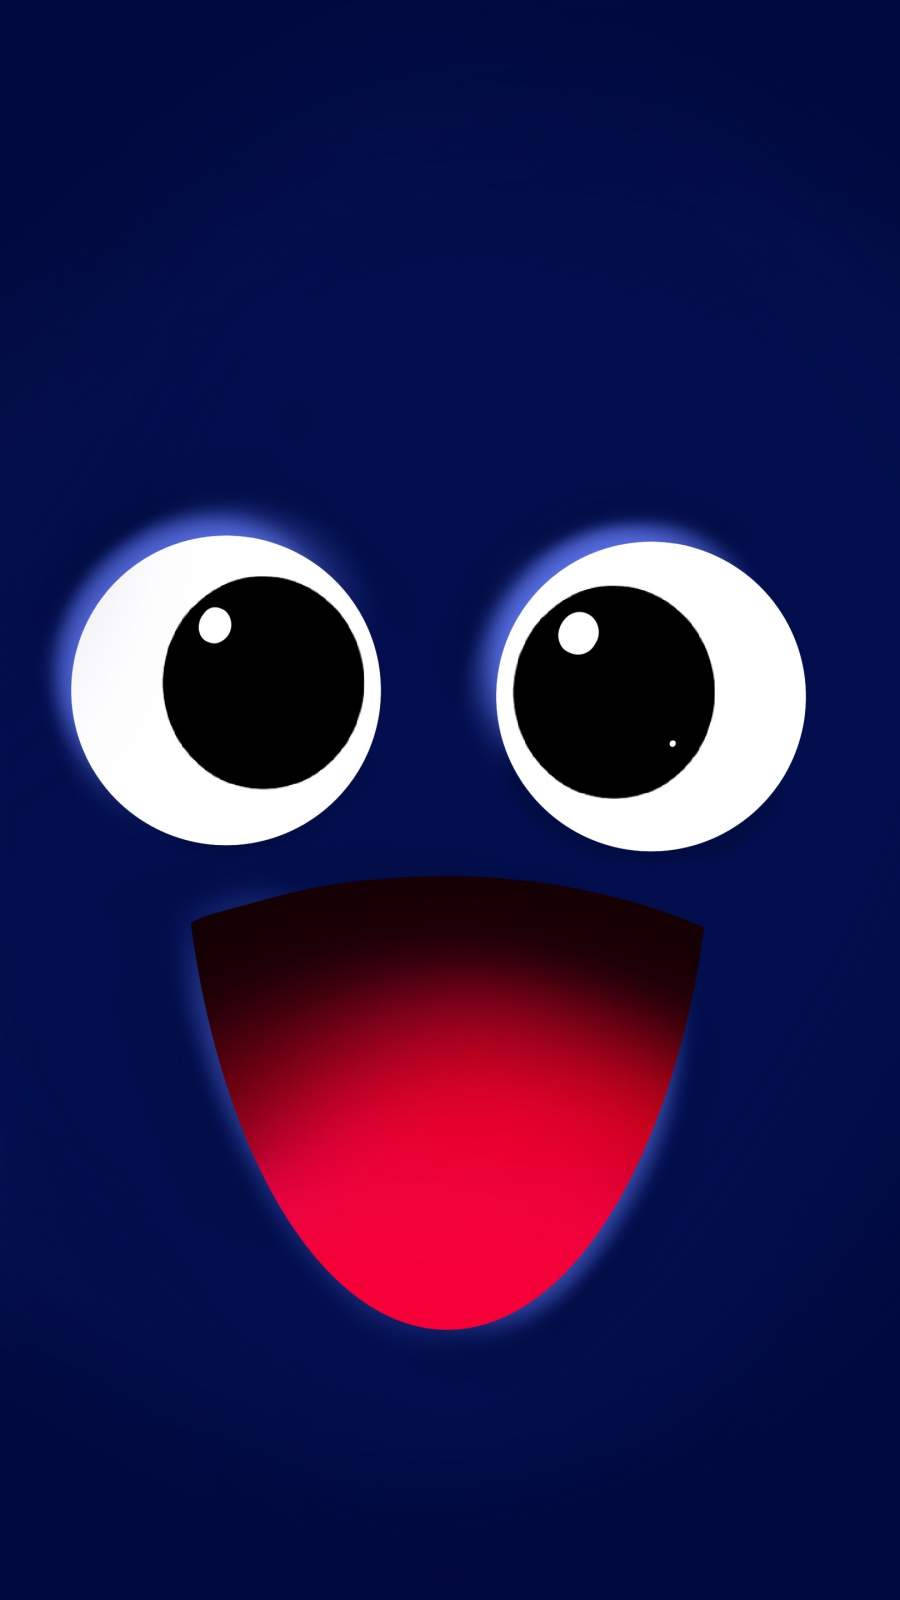 Download Excited Large Eyes Wallpaper | Wallpapers.com